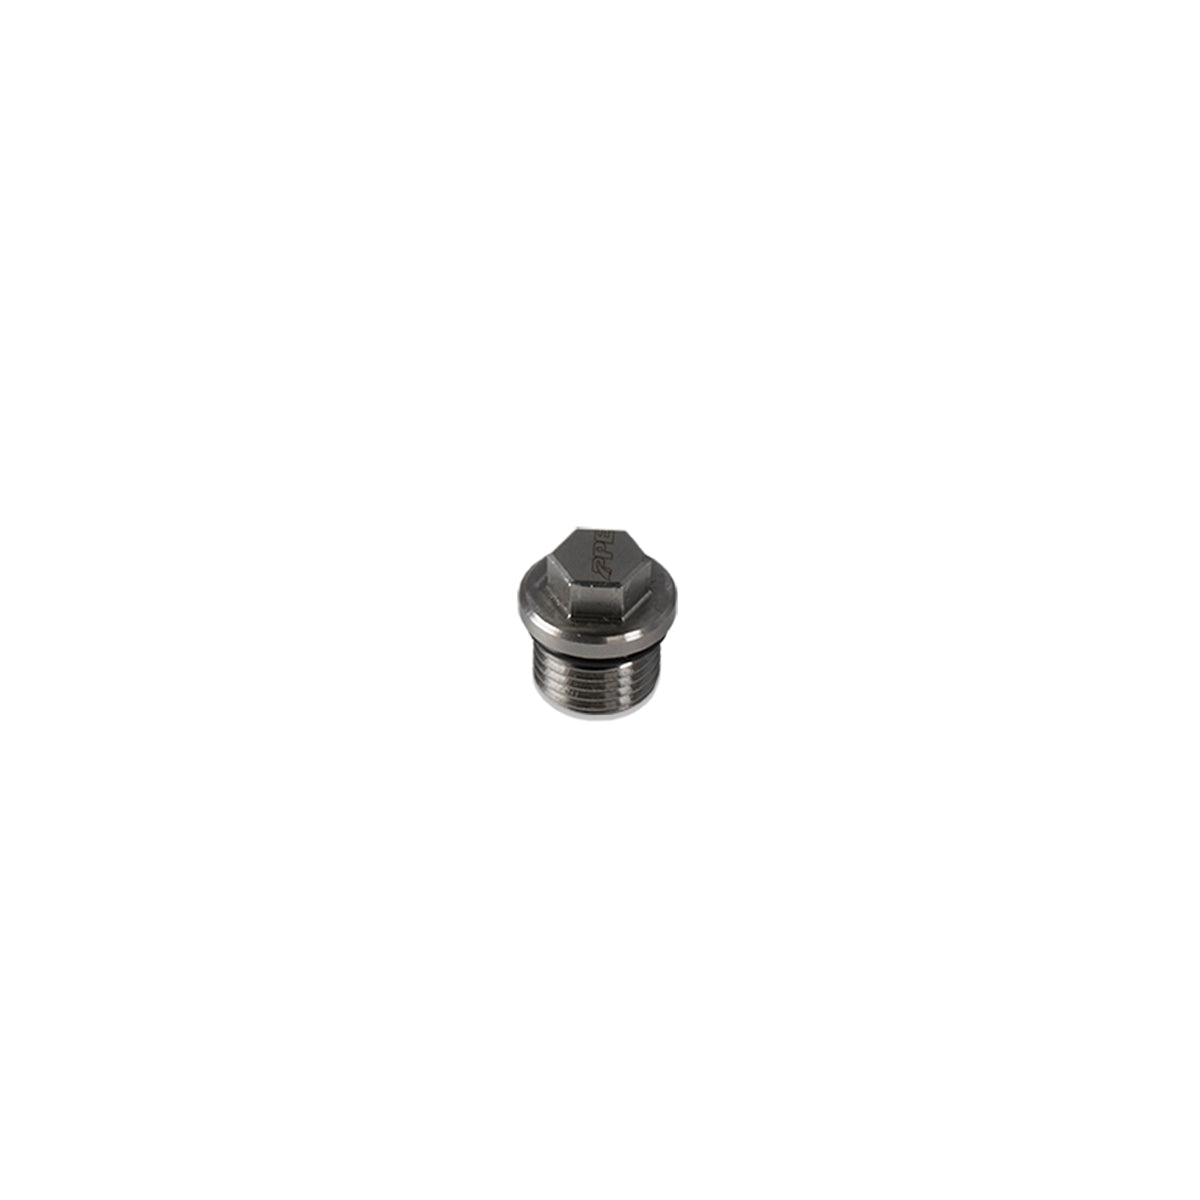 ORB Plug -6 AN (9/16 Inch -18) Stainless Steel ORB Plug with Neodymium Magnet